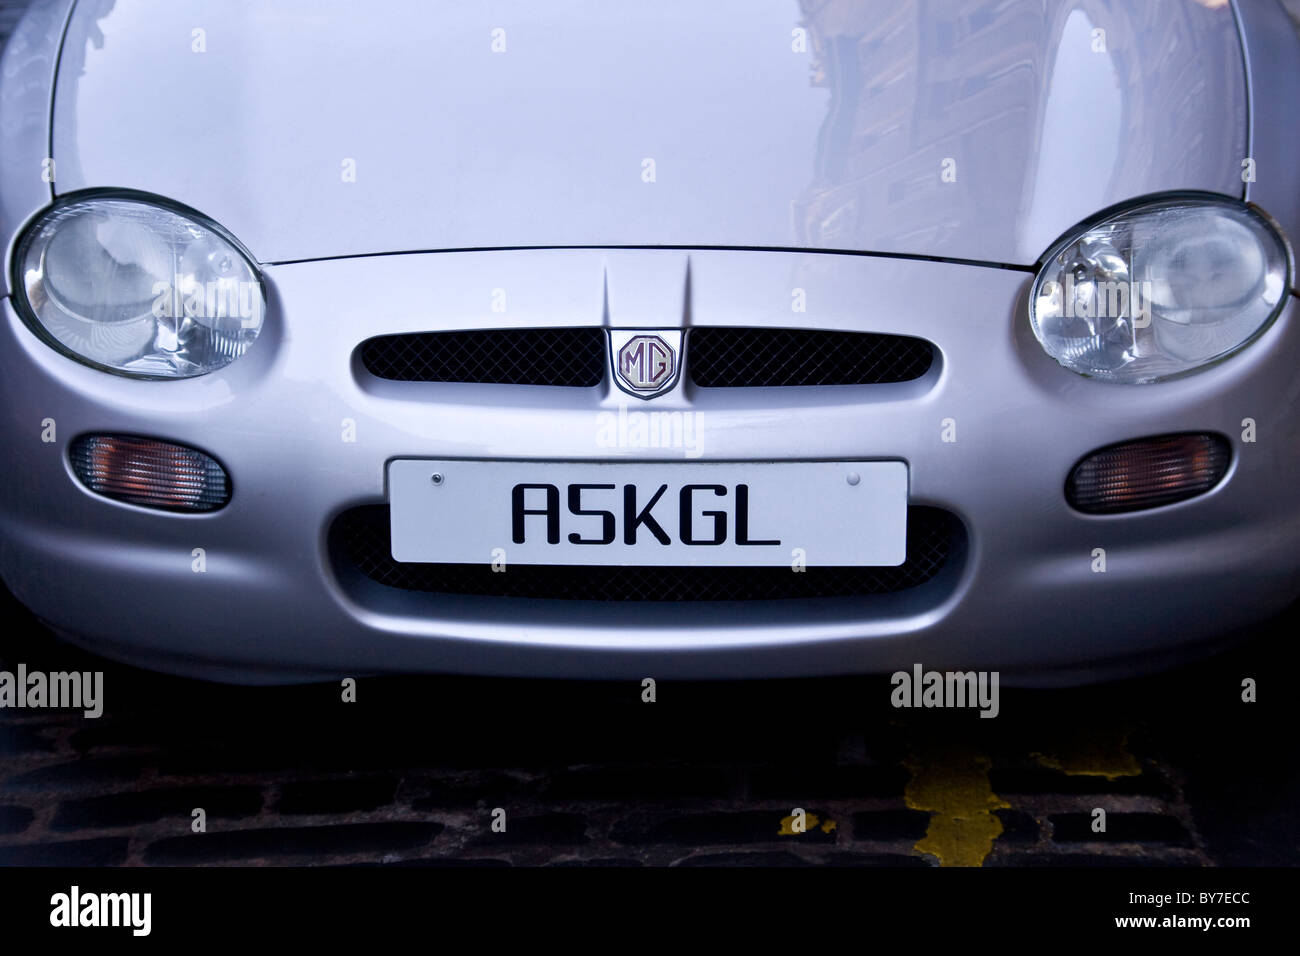 ASKGIL is a personalized number plate on the front of an MG British sports car parked in Dundee, UK Stock Photo